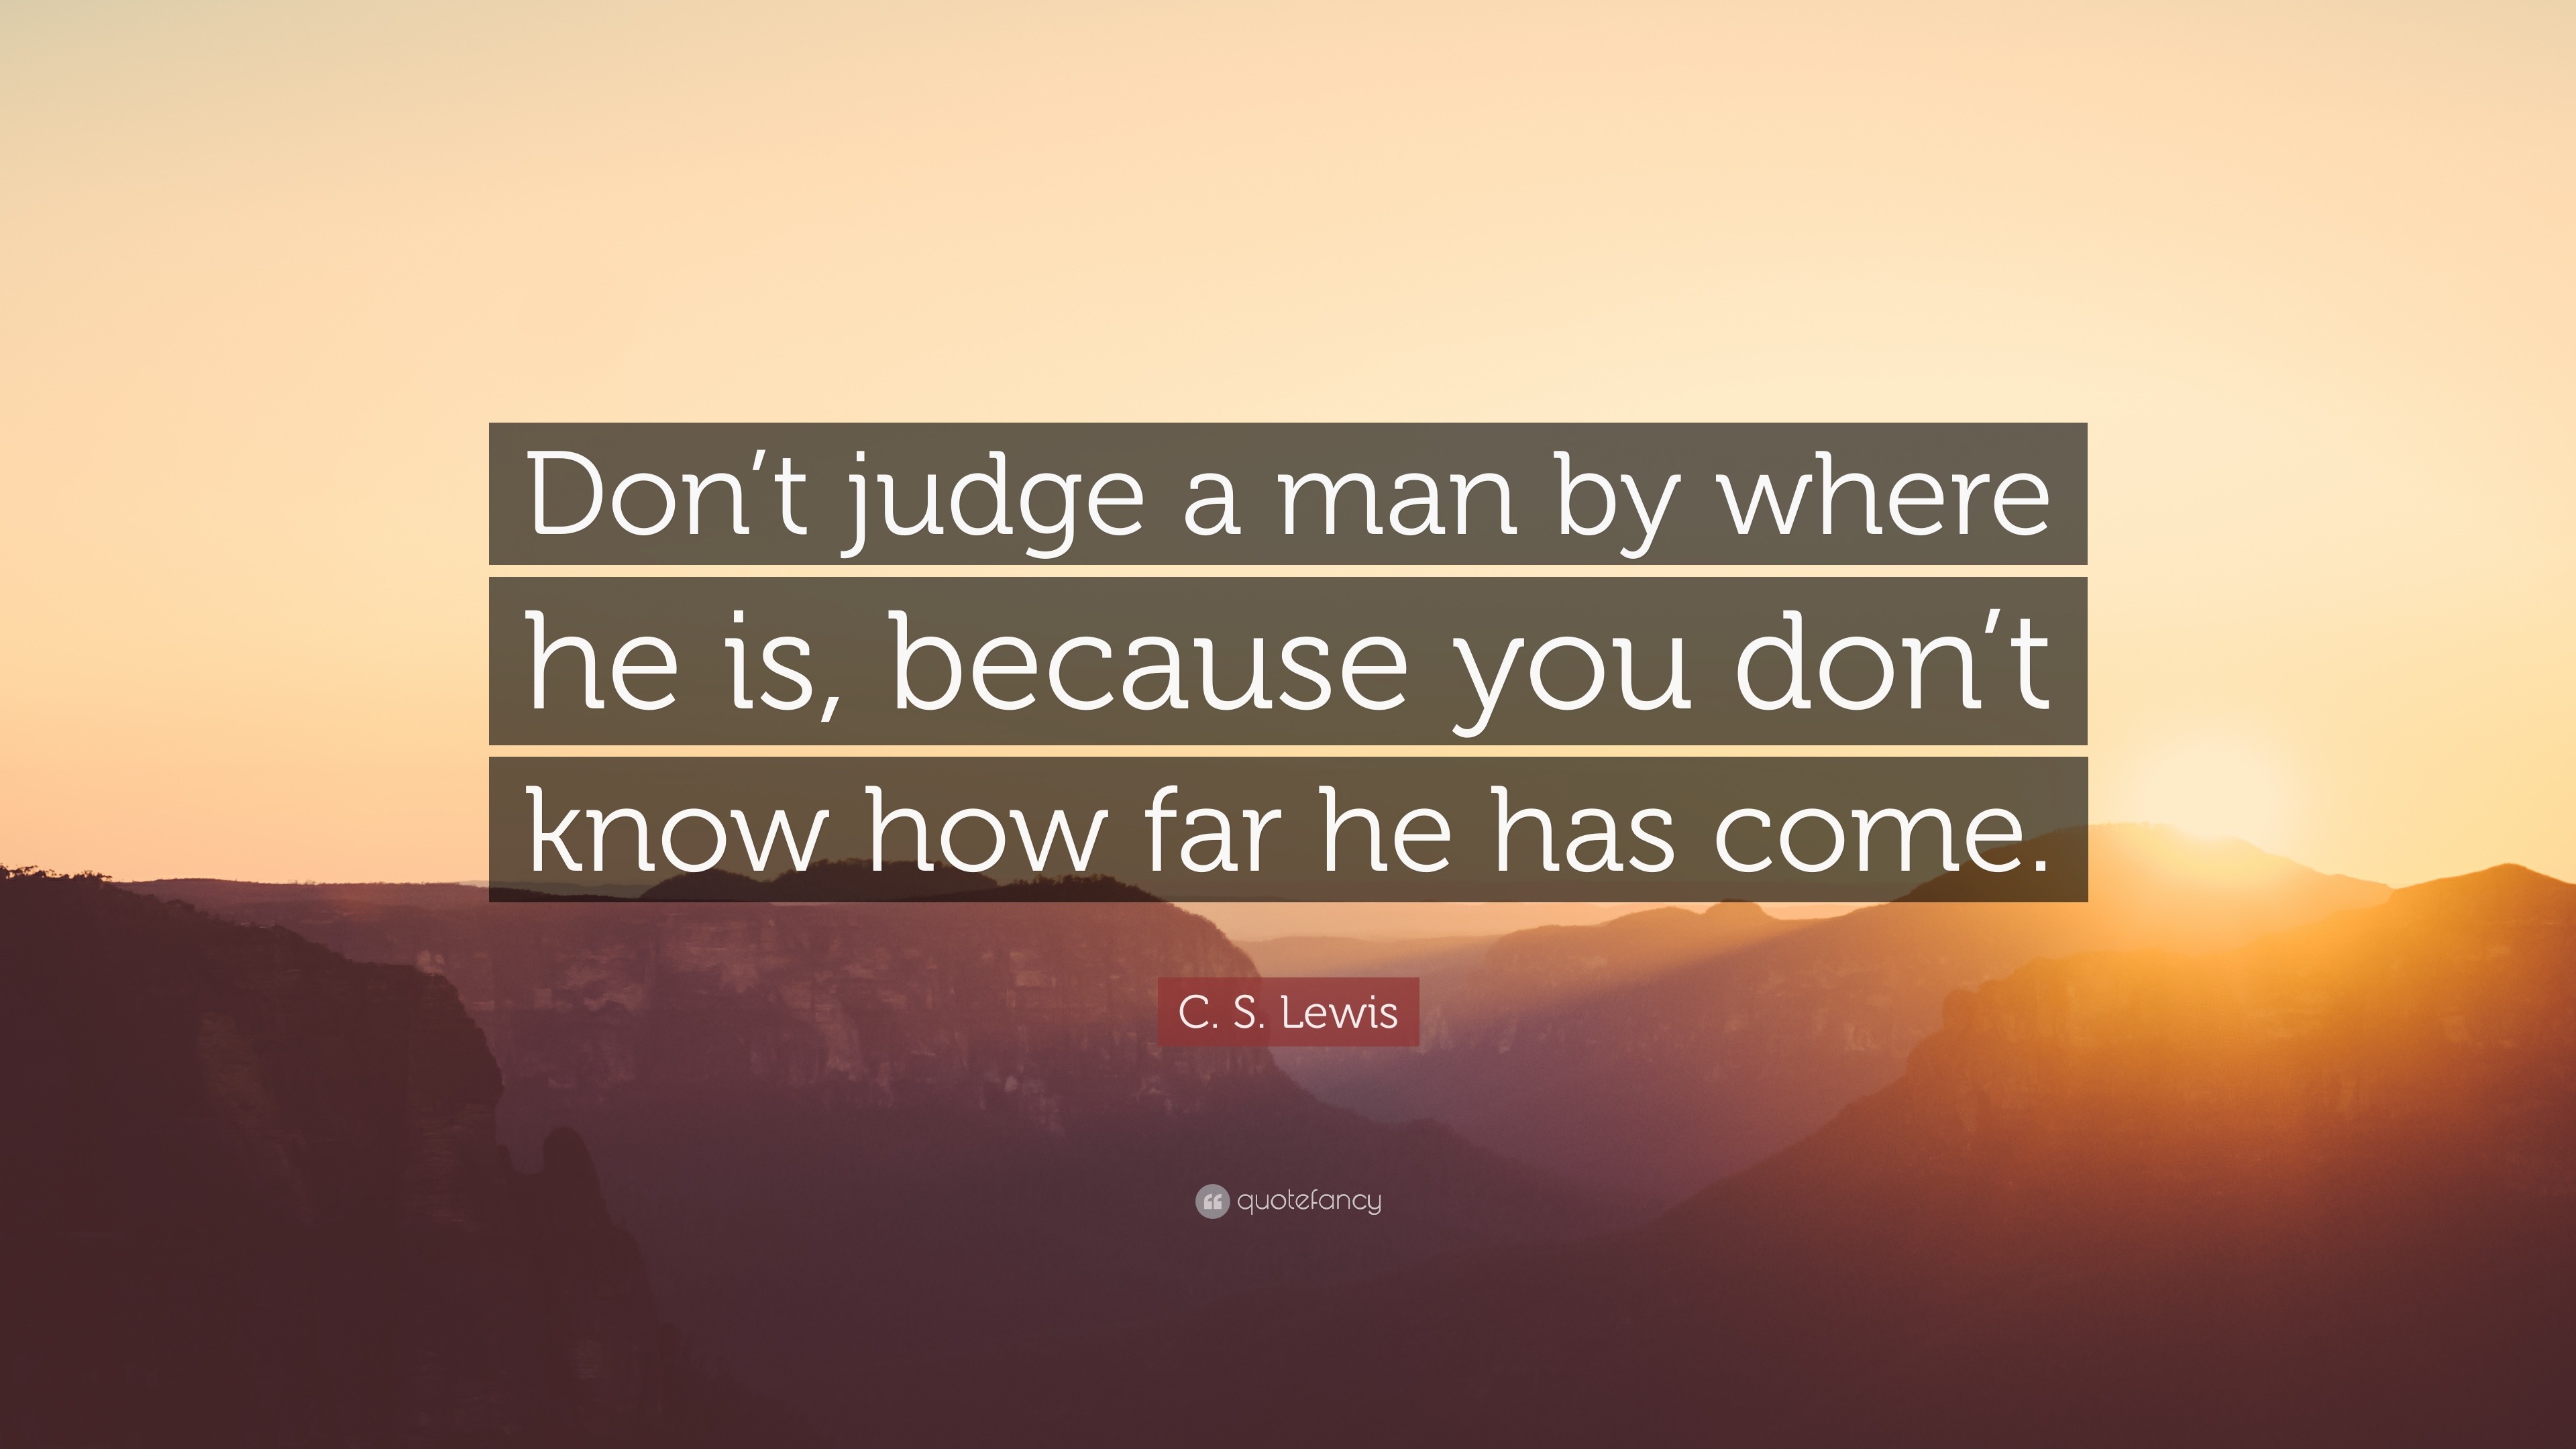 Don’t judge a man by where he is, because you don’t know how far he has com...